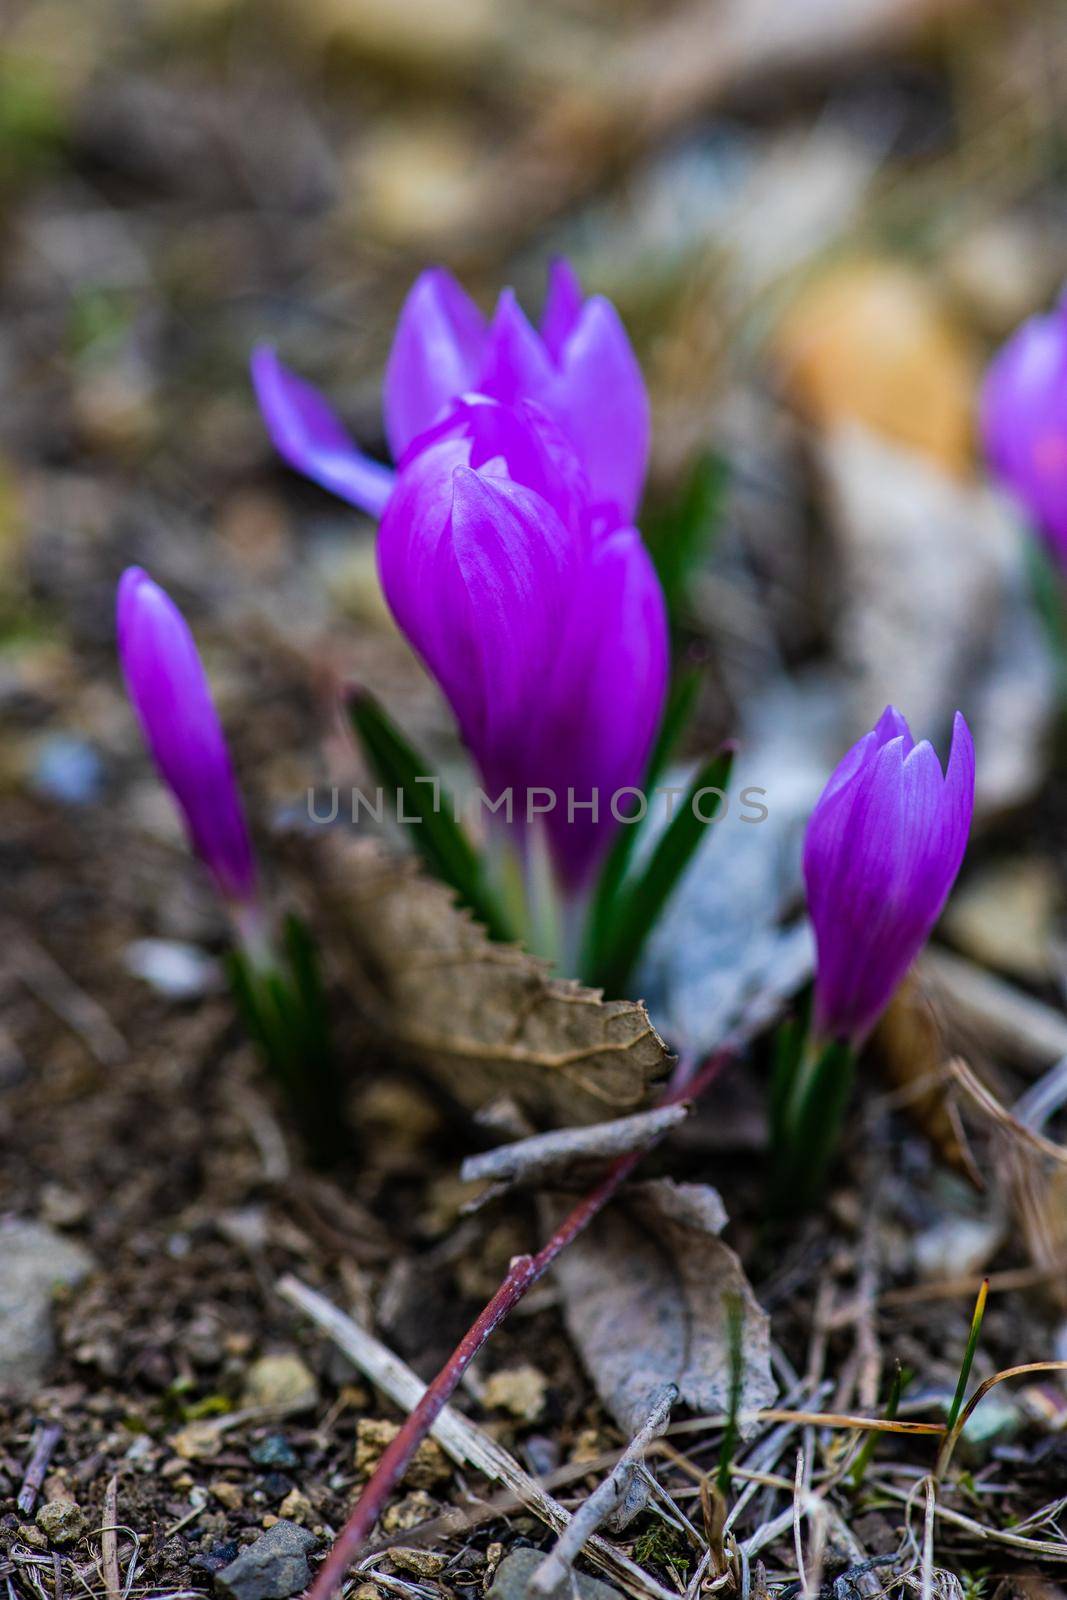 Colchicum autumnale, commonly known as crocus, meadow saffron or naked lady